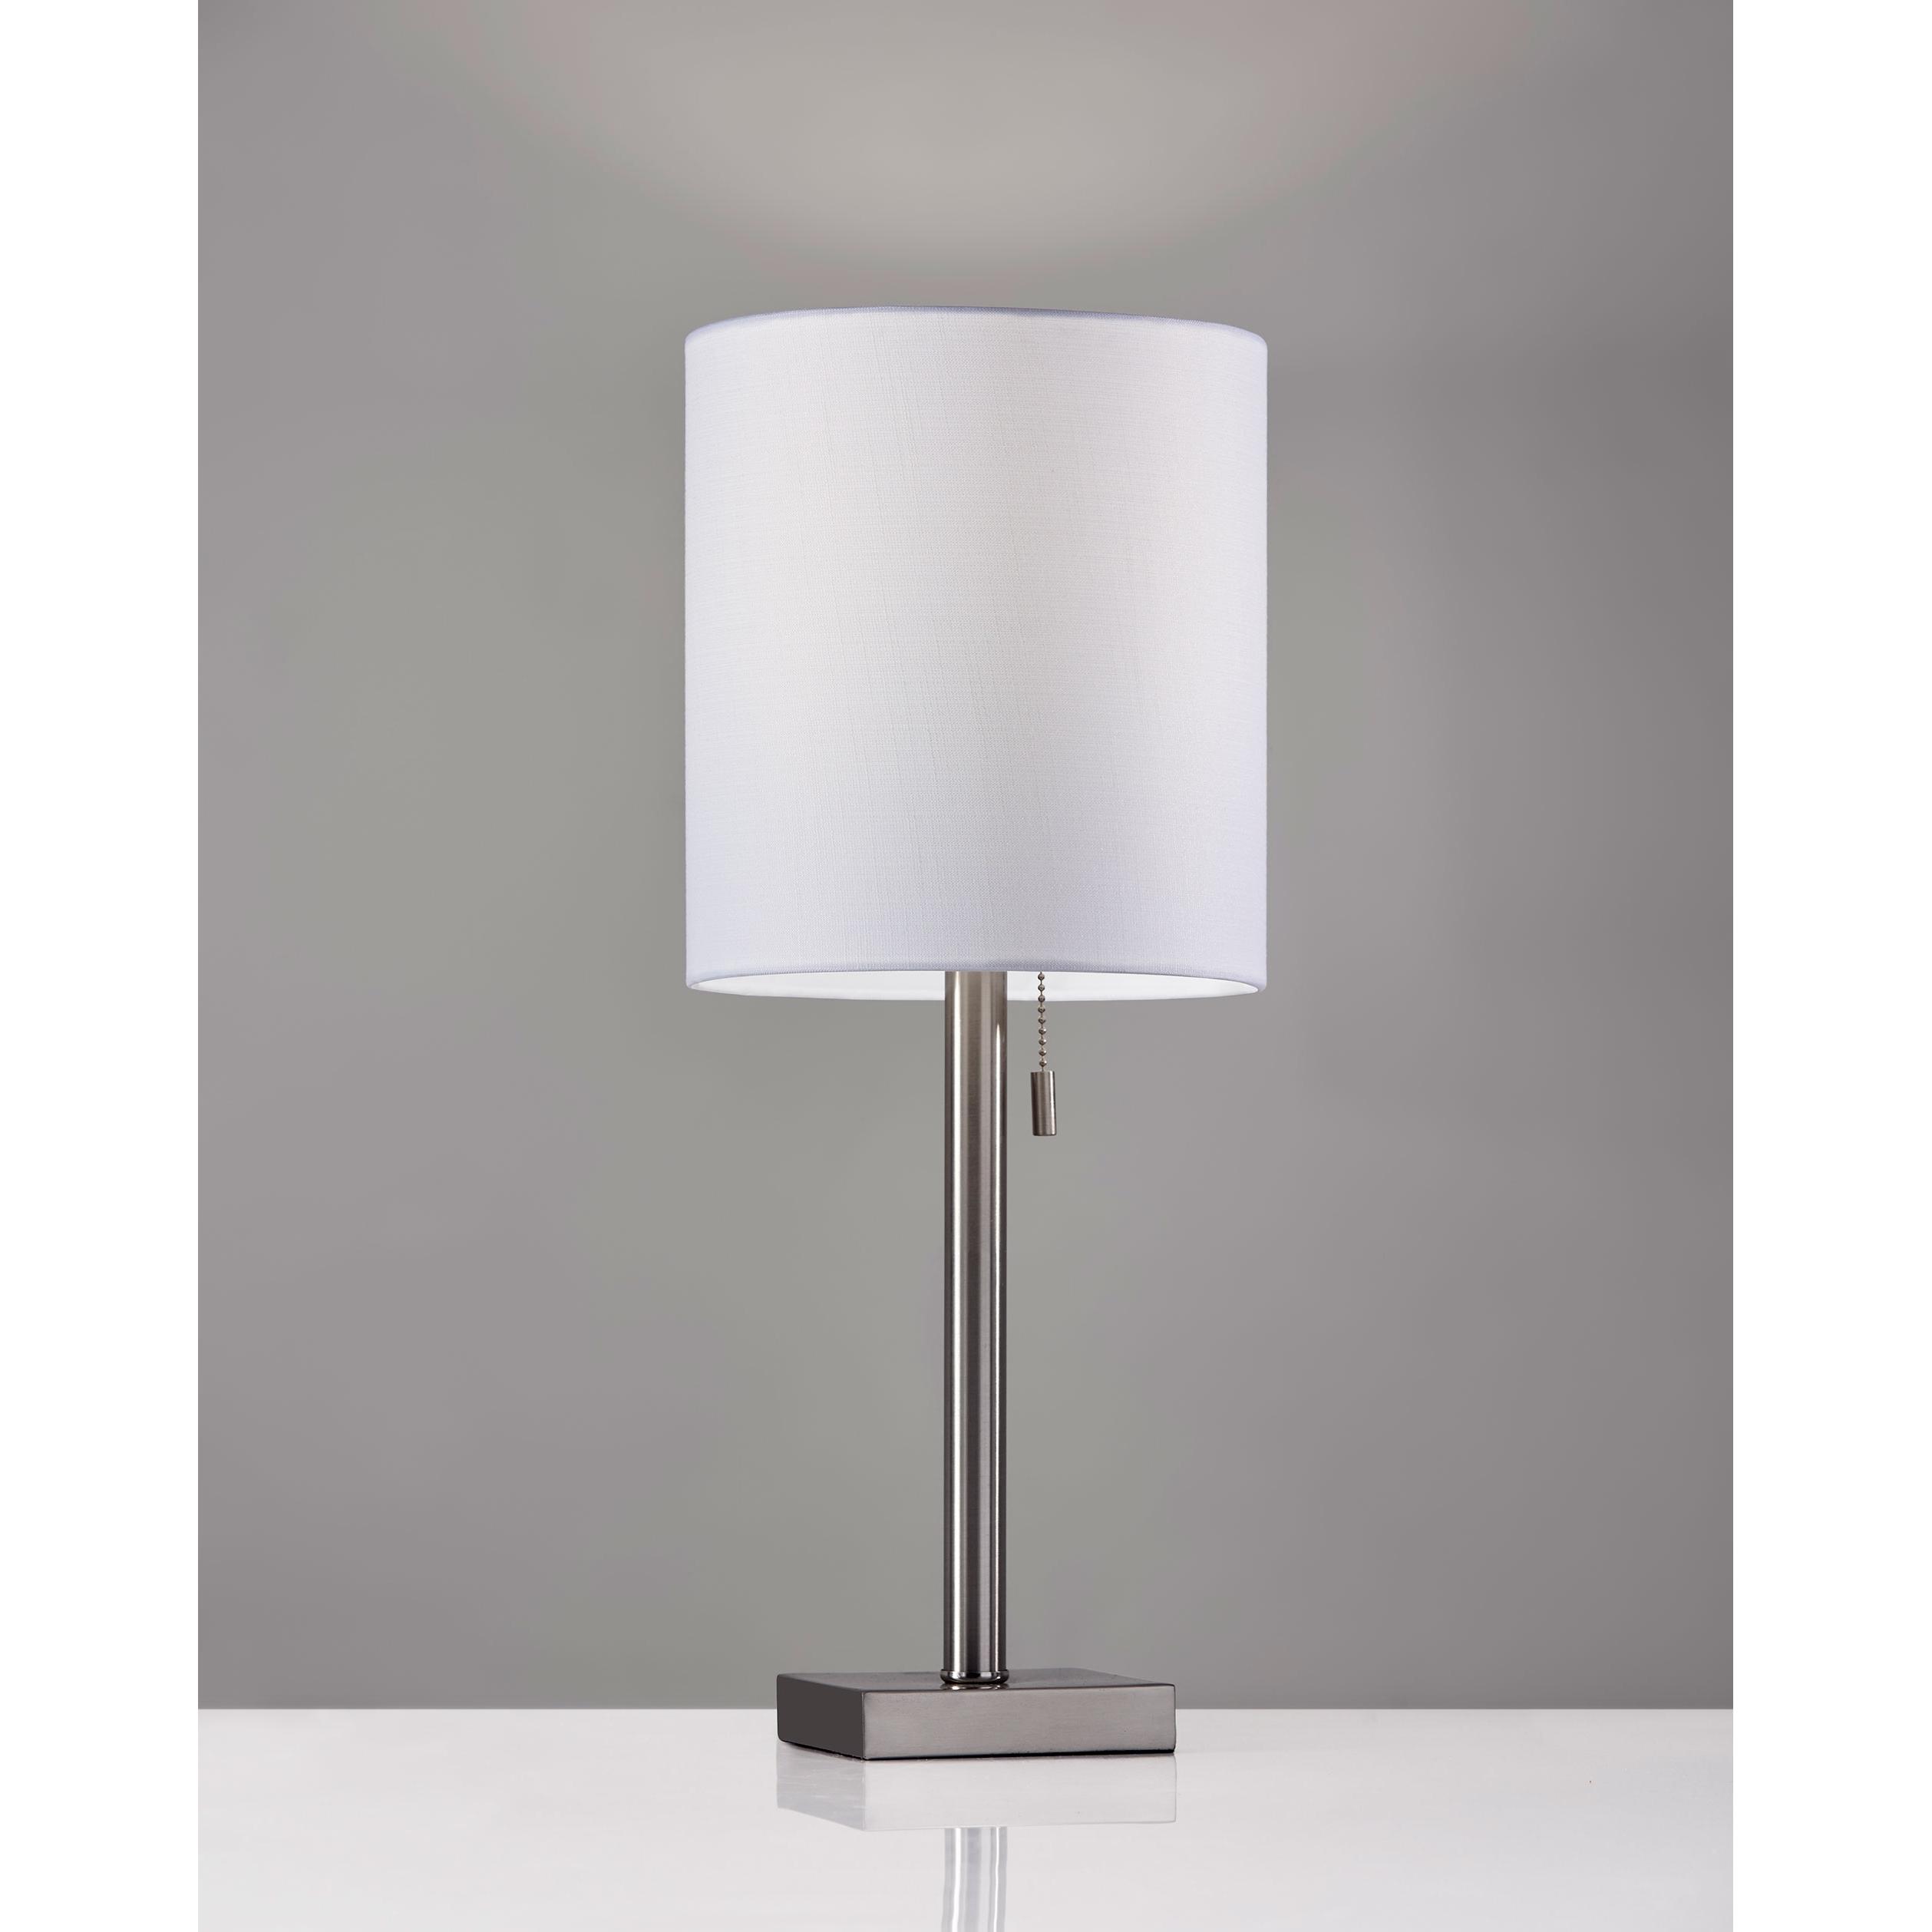 Liam Brushed Steel Table Lamp By Adesso, Adesso Brushed Steel Table Lamp